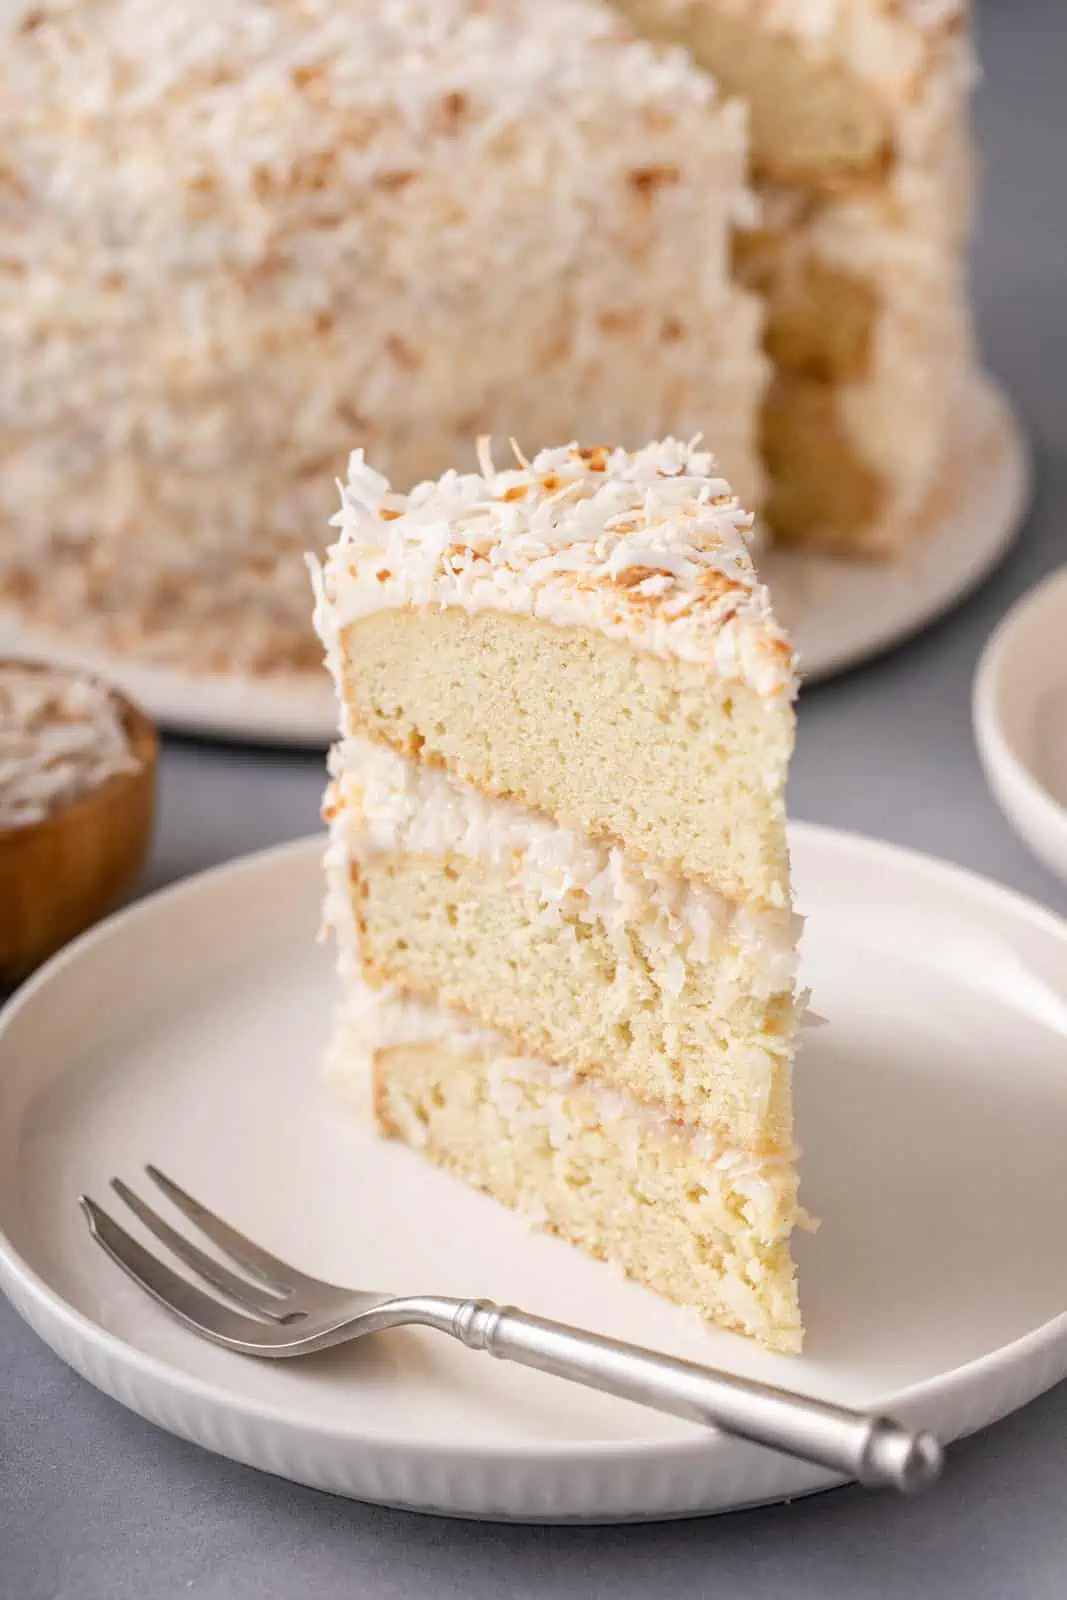 Close up image of a slice of coconut cake on a white plate.